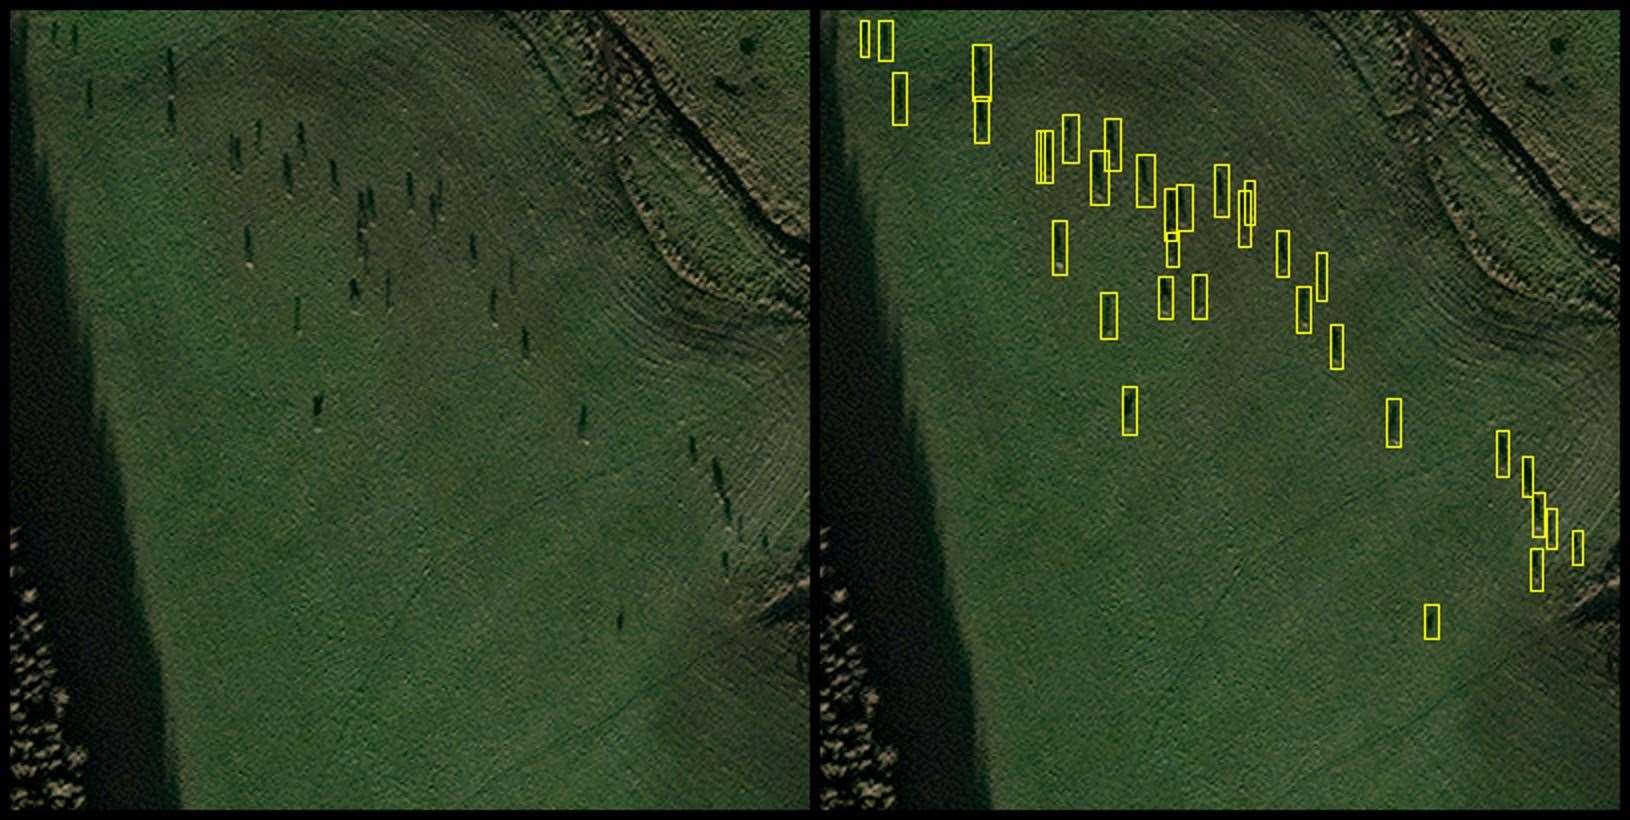 Deer identified by the AI software from a satellite image ©EOLAS Insight/Airbus.